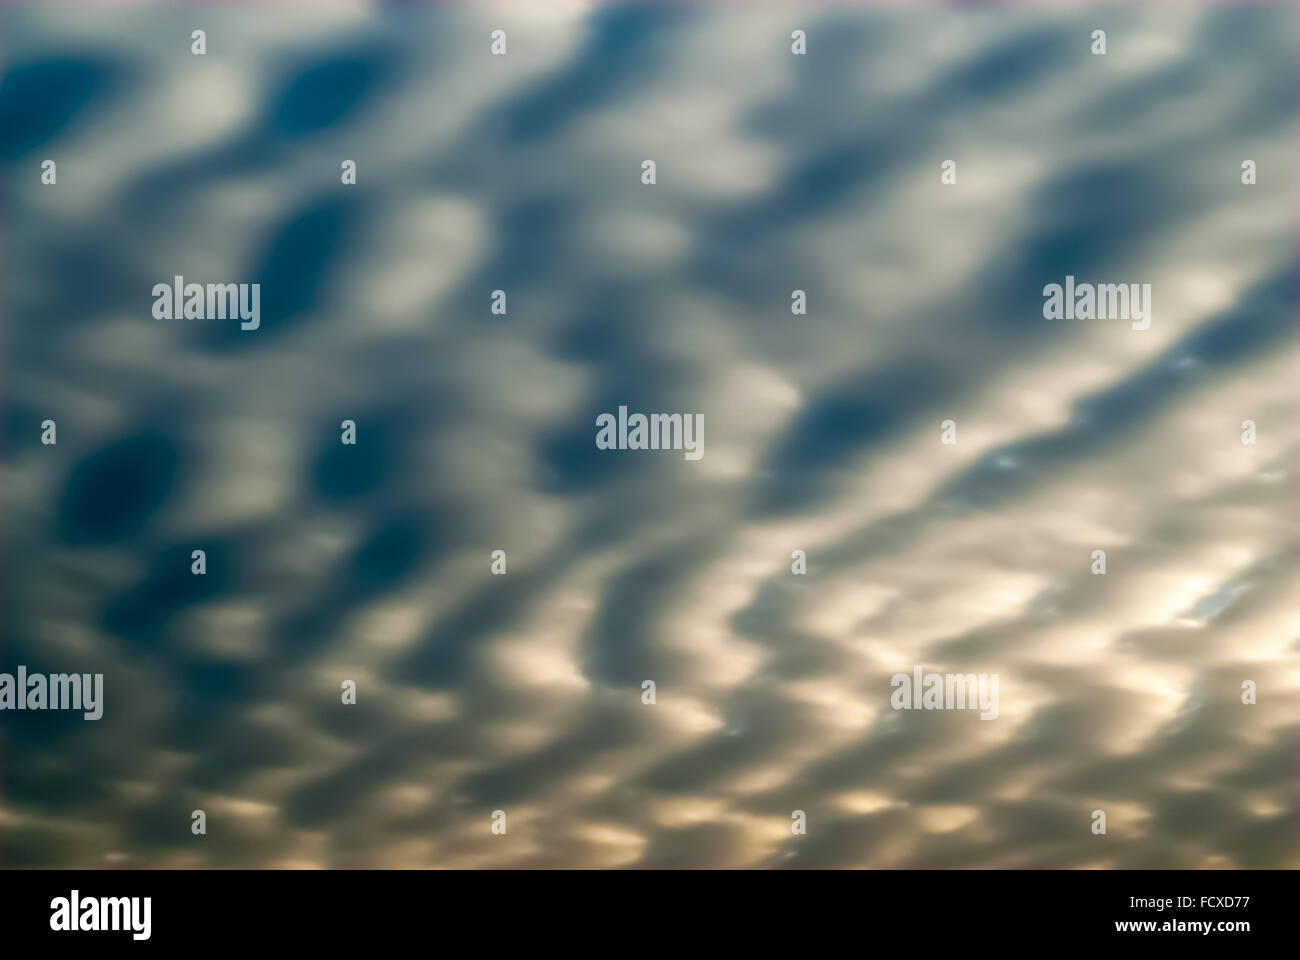 Abstract smooth gray and blue cloudscape with jagged wave forms and shadows, partly illuminated by sun behind clouds. Stock Photo